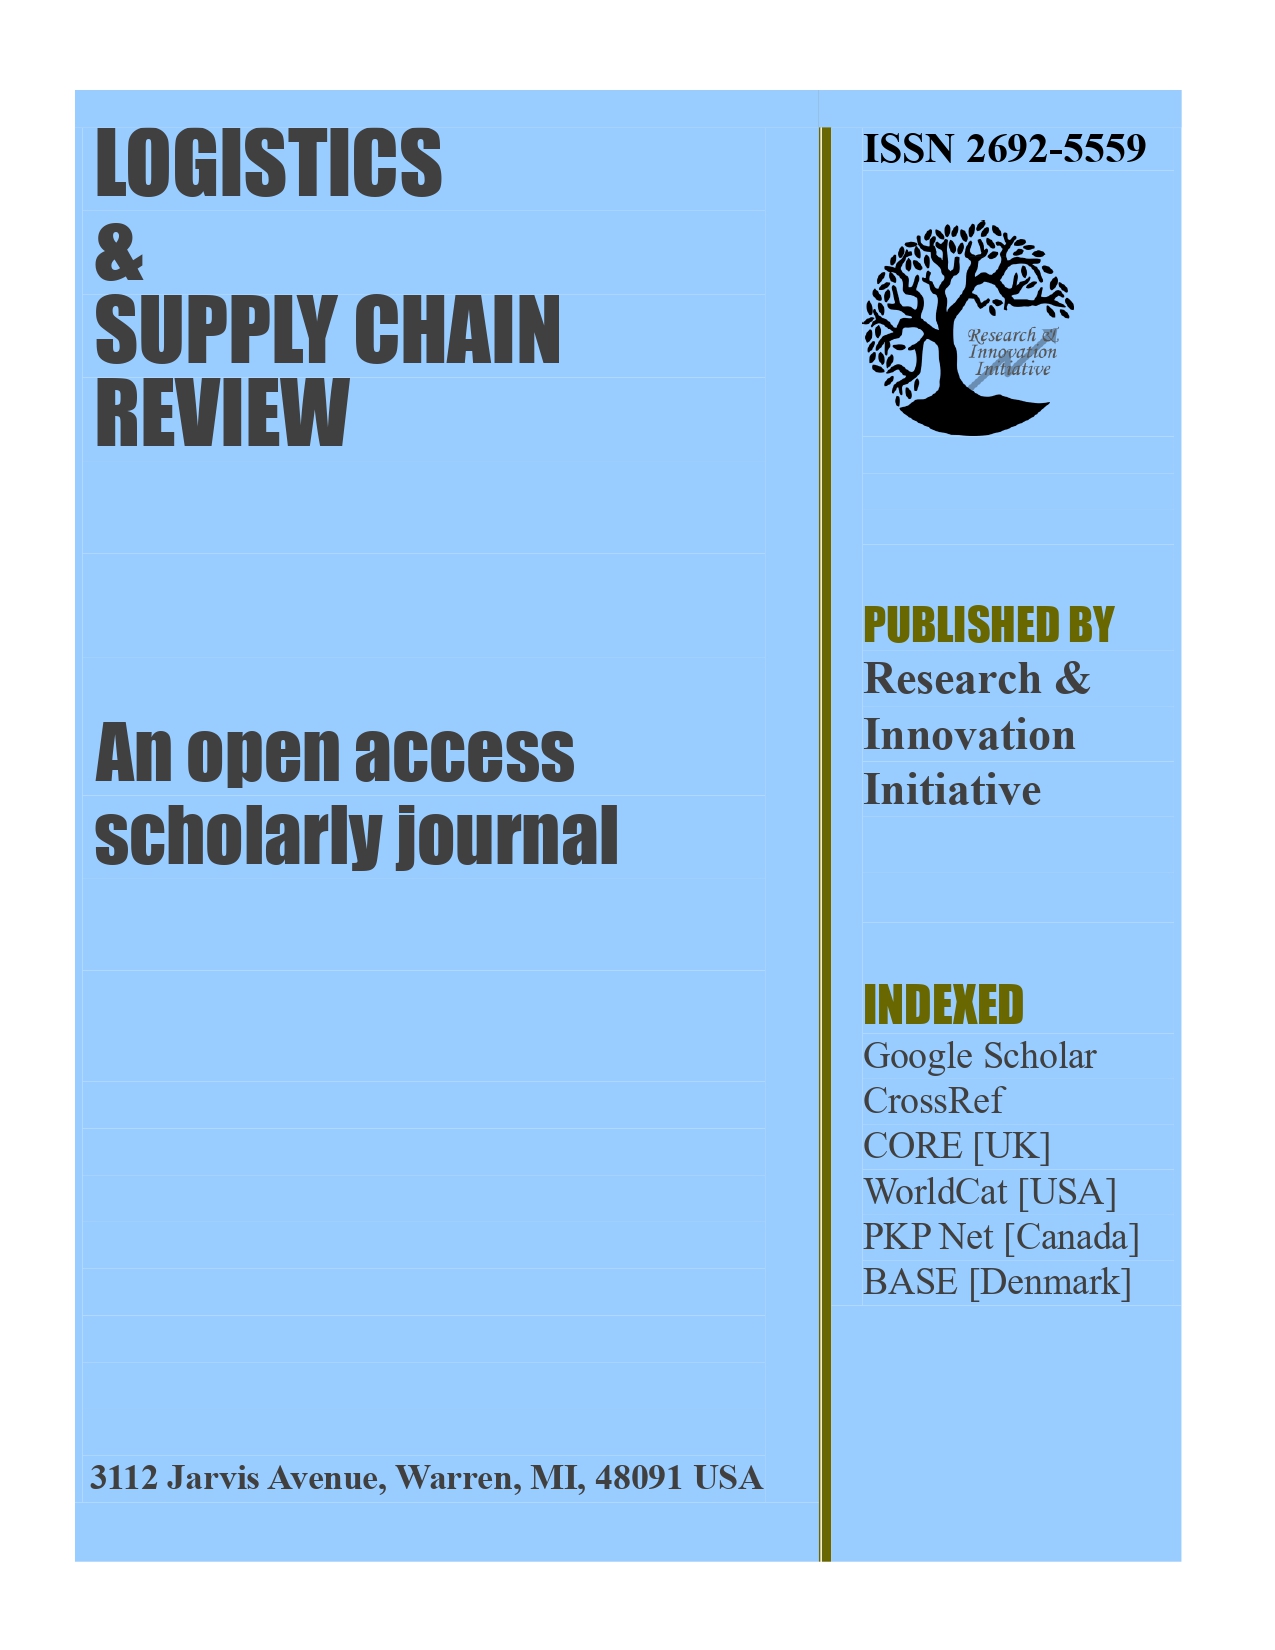 Logistics & Supply Chain Review